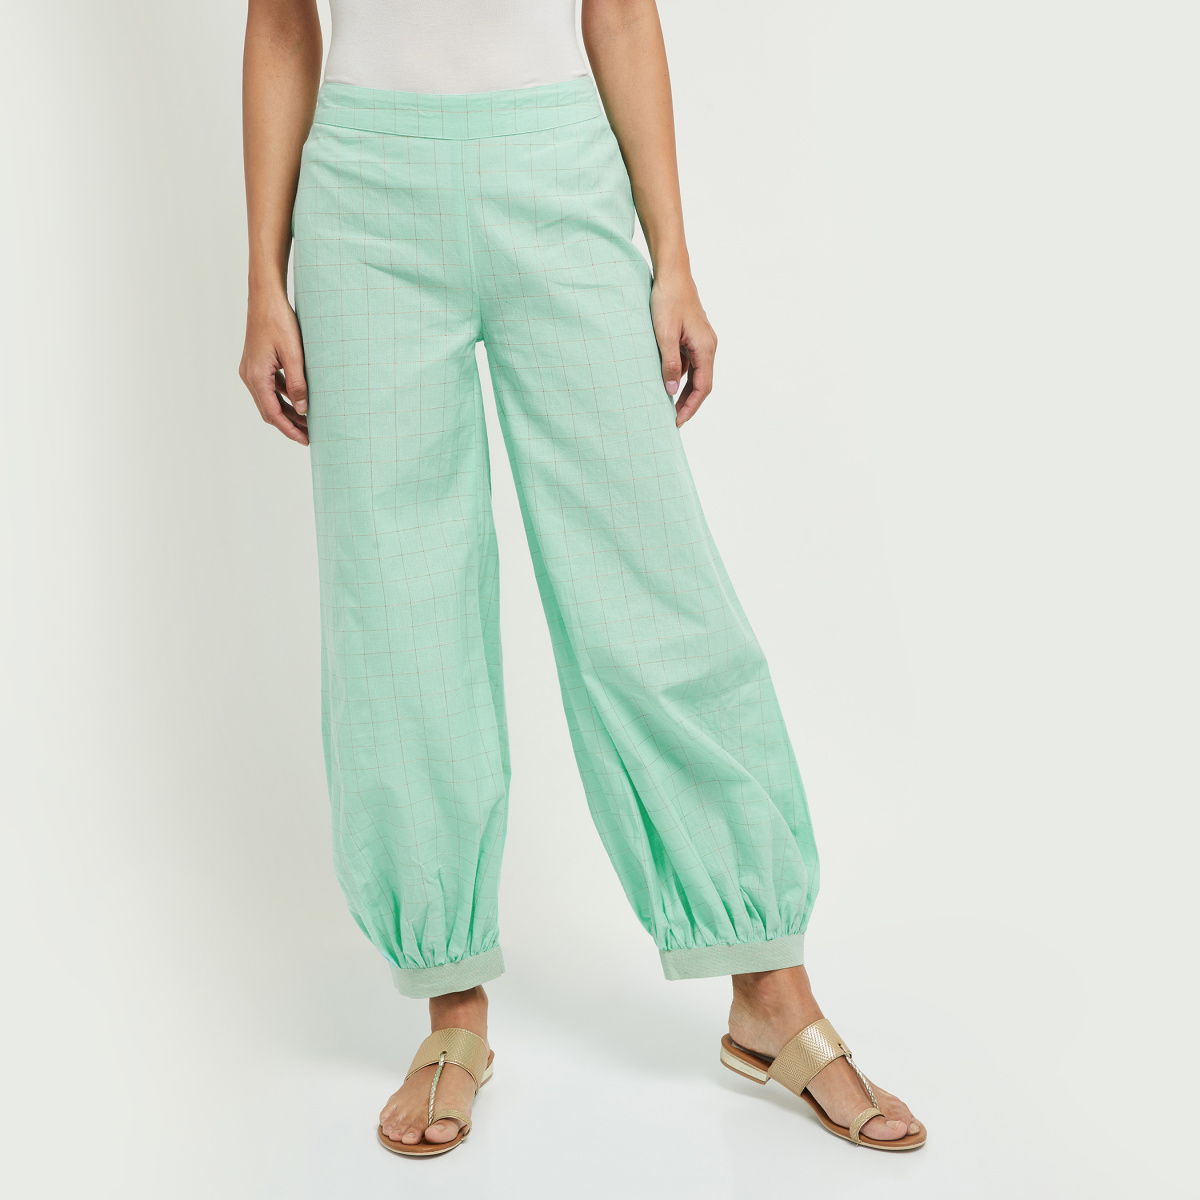 Forever 21 Bottoms Pants and Trousers  Buy Forever 21 Belted Cuffed Hem  Pants Online  Nykaa Fashion